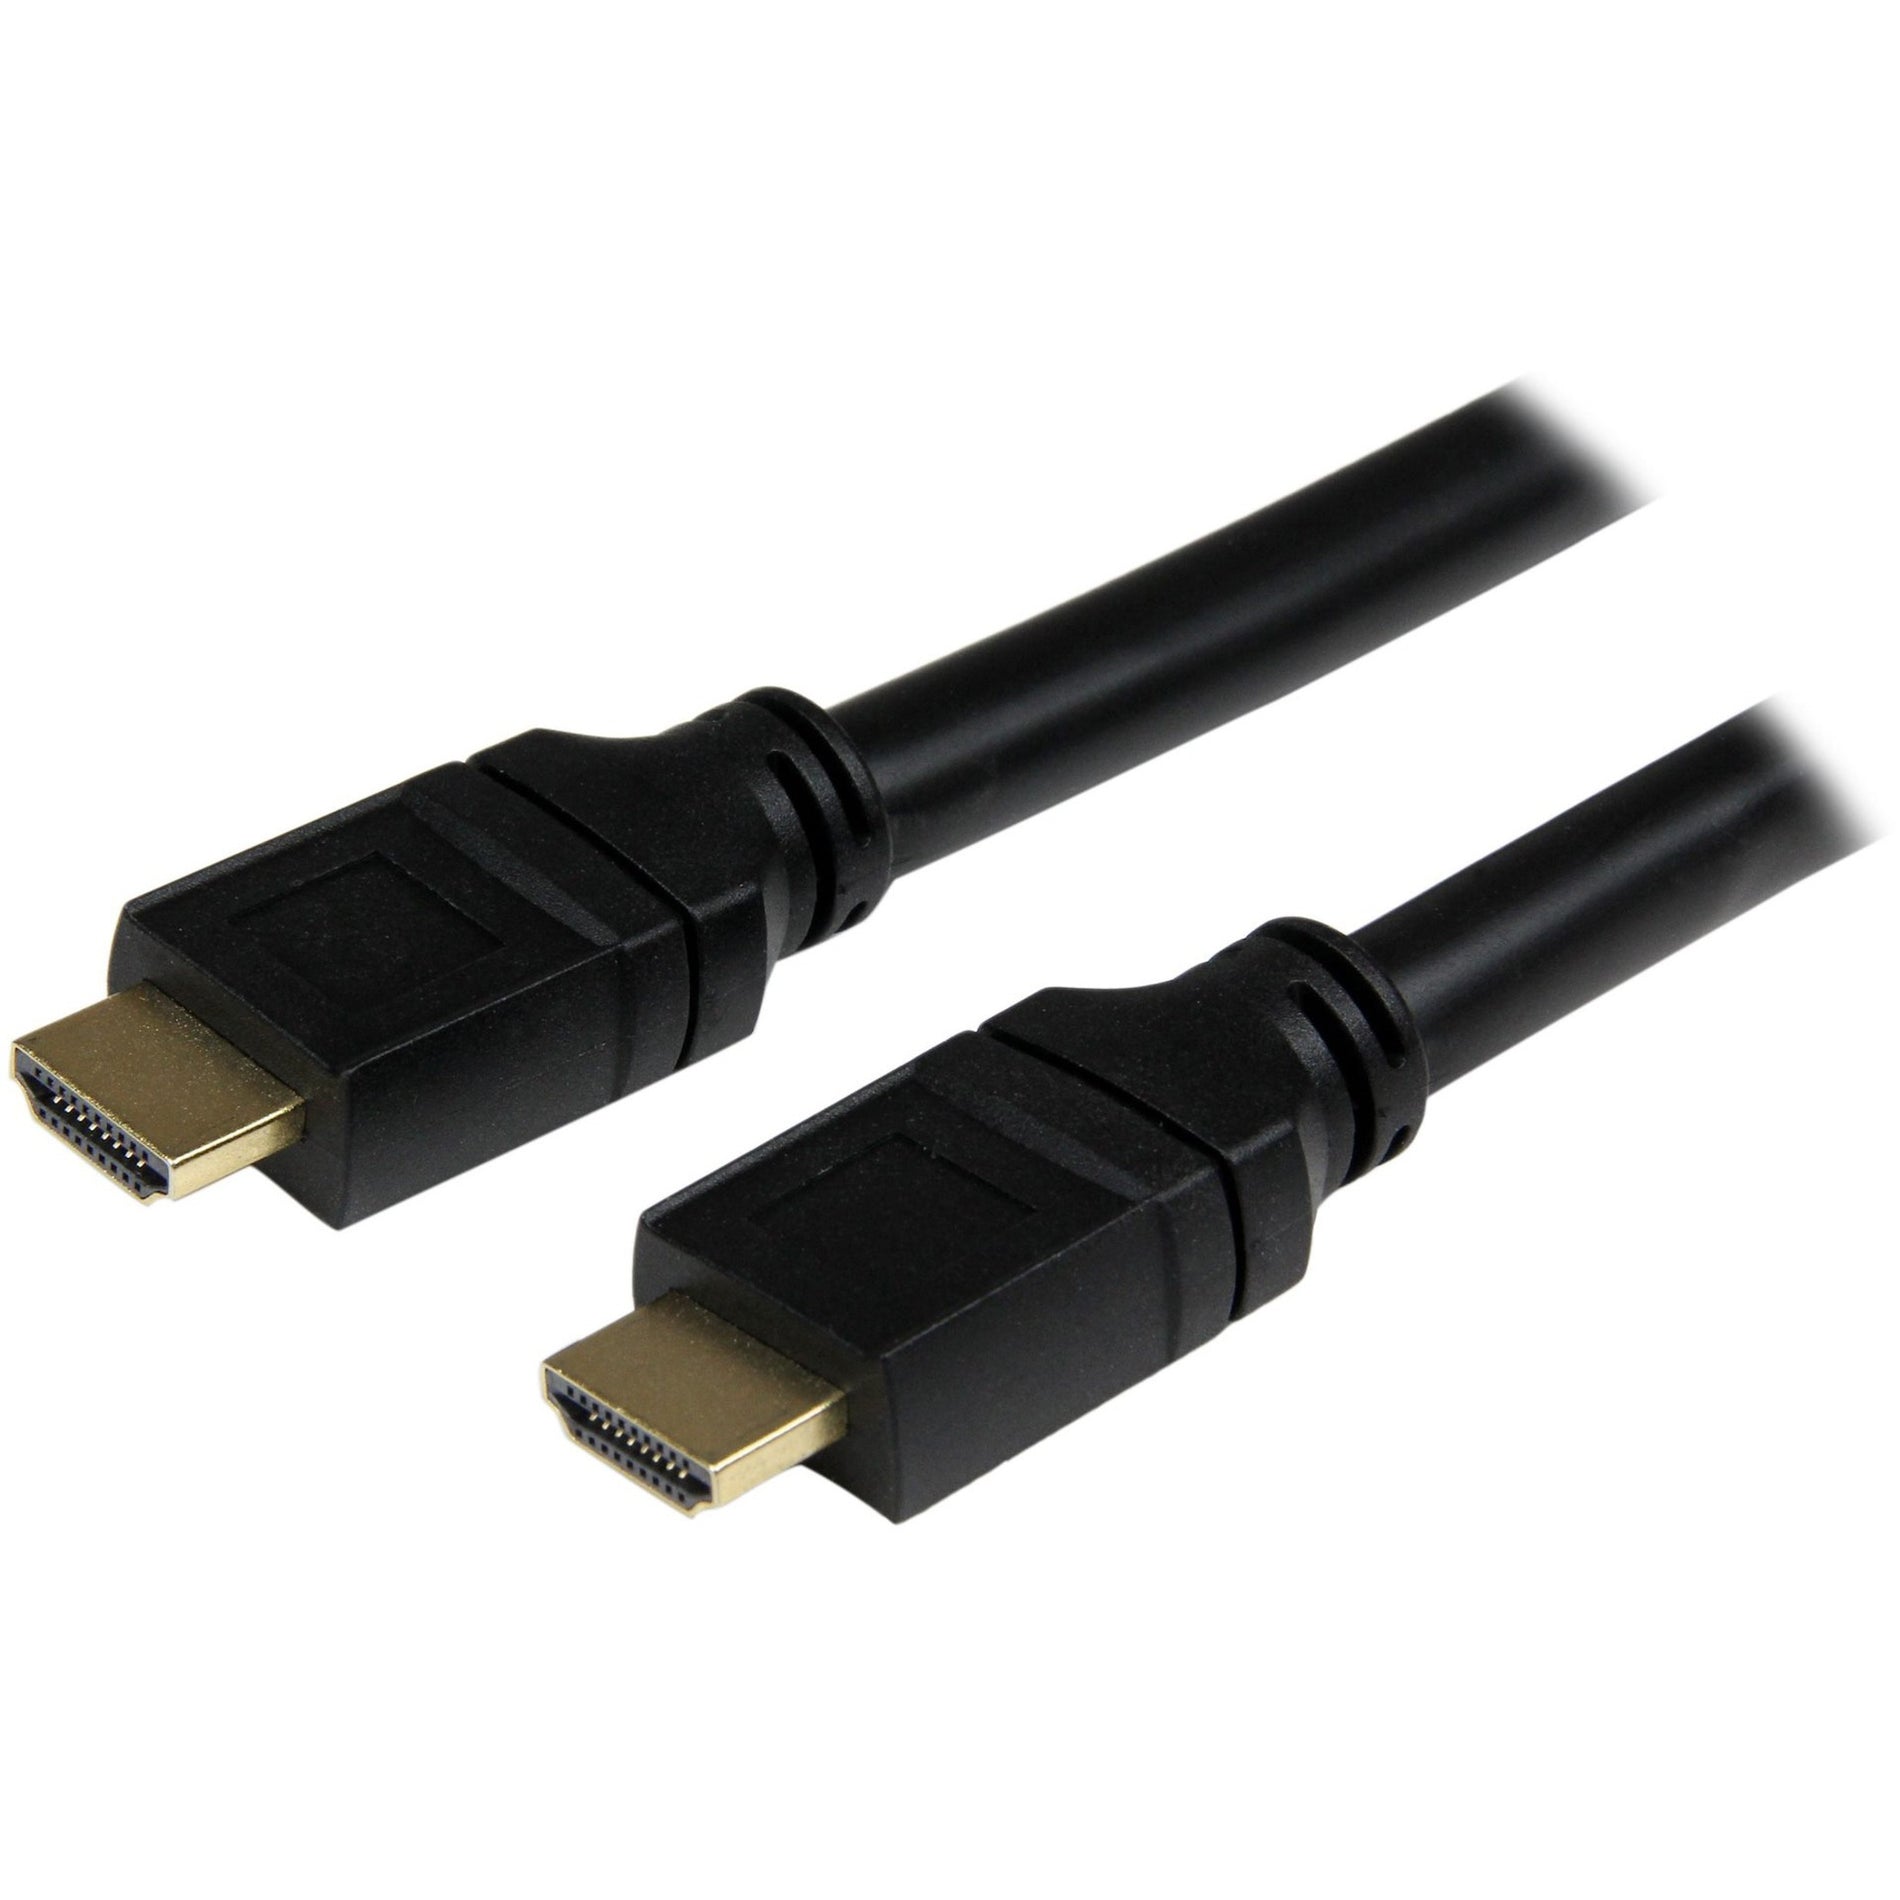 StarTech.com HDPMM50 50 ft 15m Plenum-Rated High Speed HDMI Cable - HDMI to HDMI - M/M, Corrosion-free, EMI Protection, HDCP 1.4, Audio Return Channel (ARC), Consumer Electronics Control (CEC), Strain Relief, Signal Booster